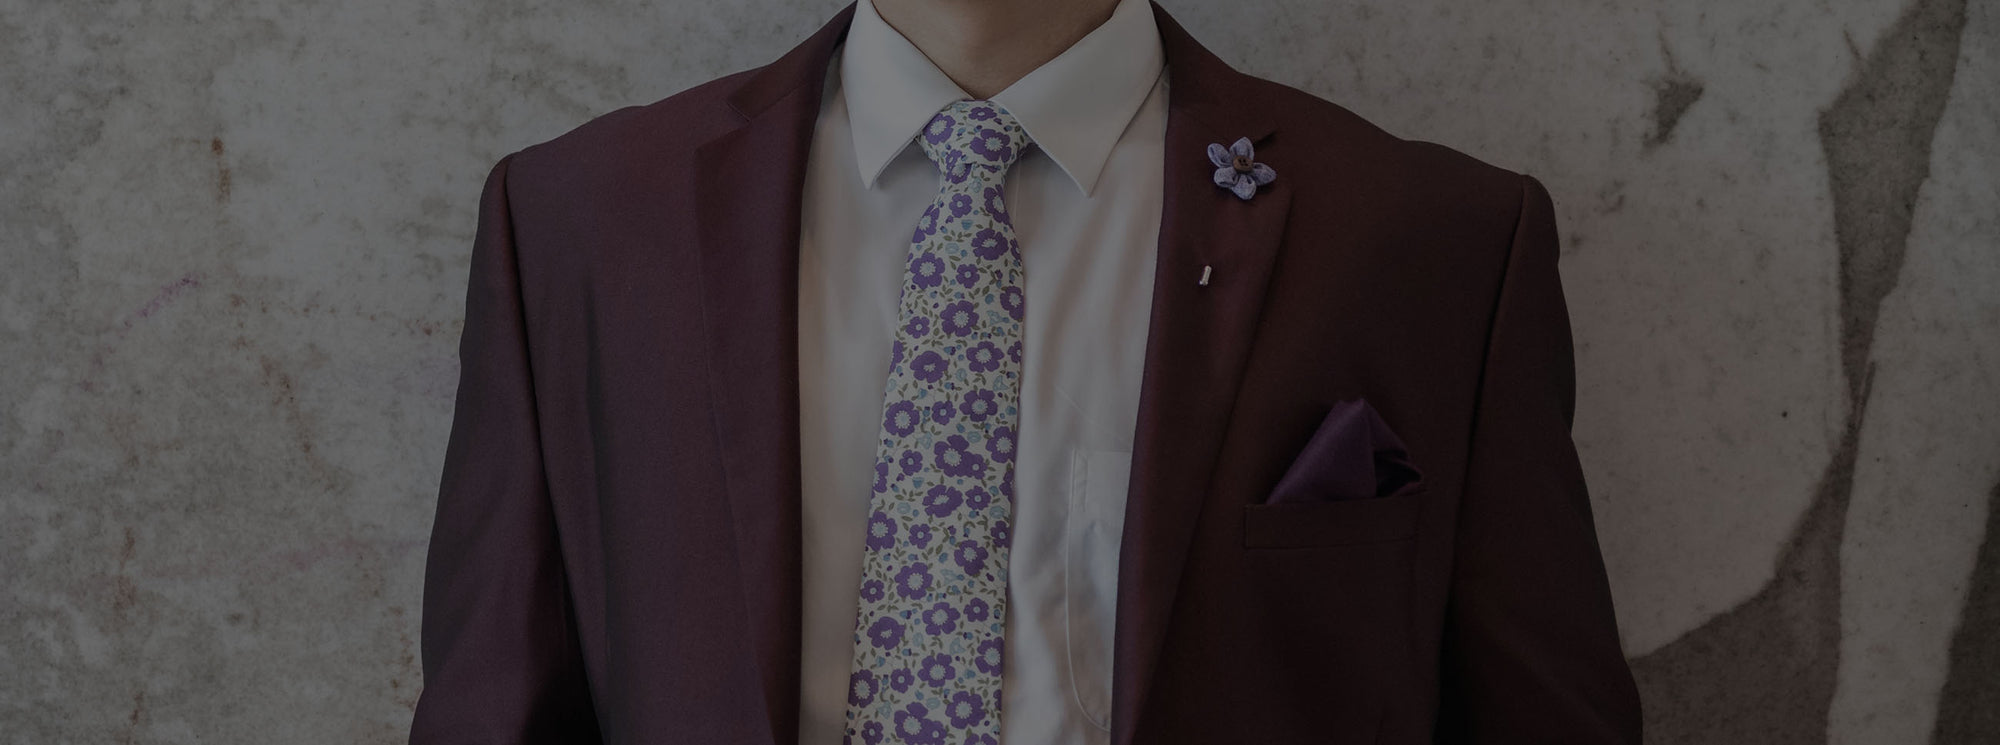 Burgundy Suit with a Silver Lapel Pin